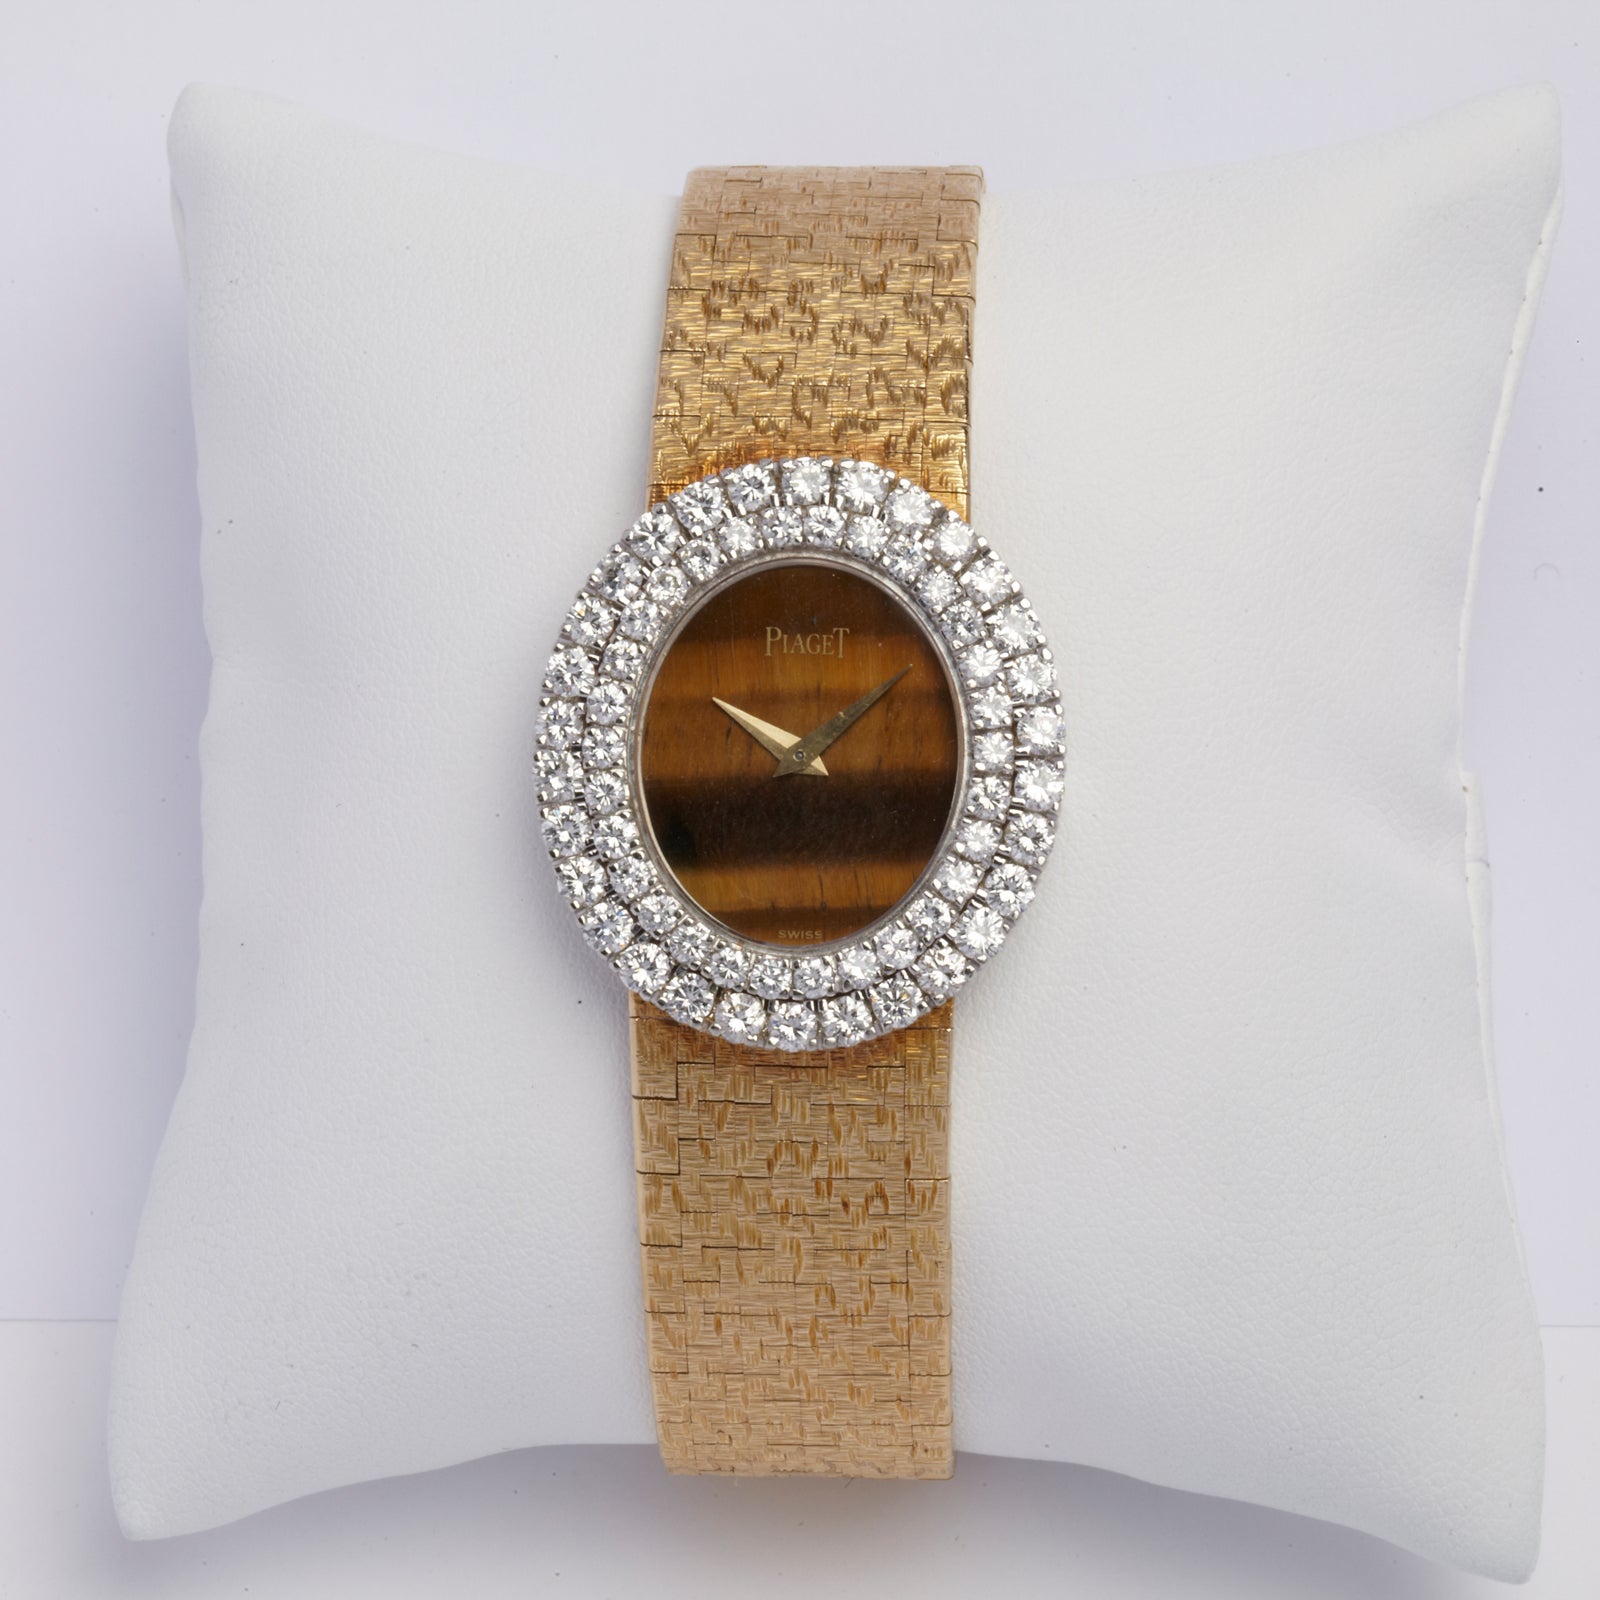 A diamond and yellow gold Piaget watch with tiger's eye dial, circa 1960.